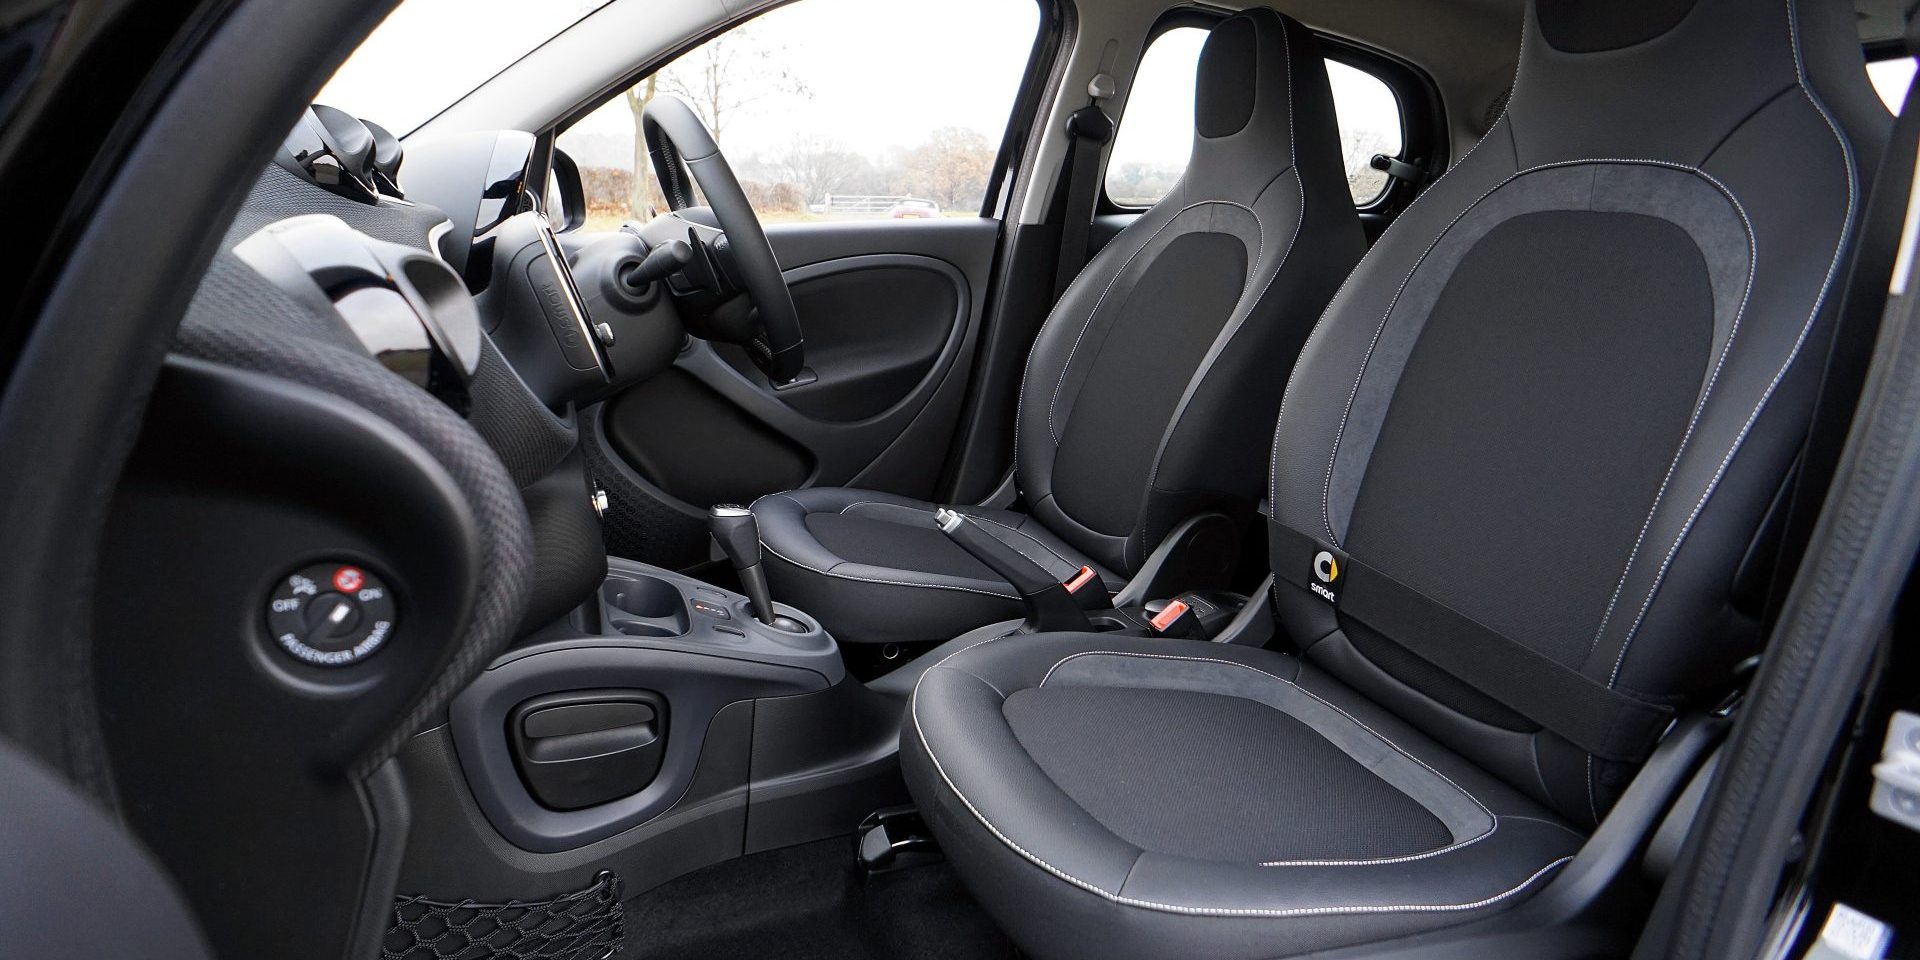 How To Protect Leather Car Seats